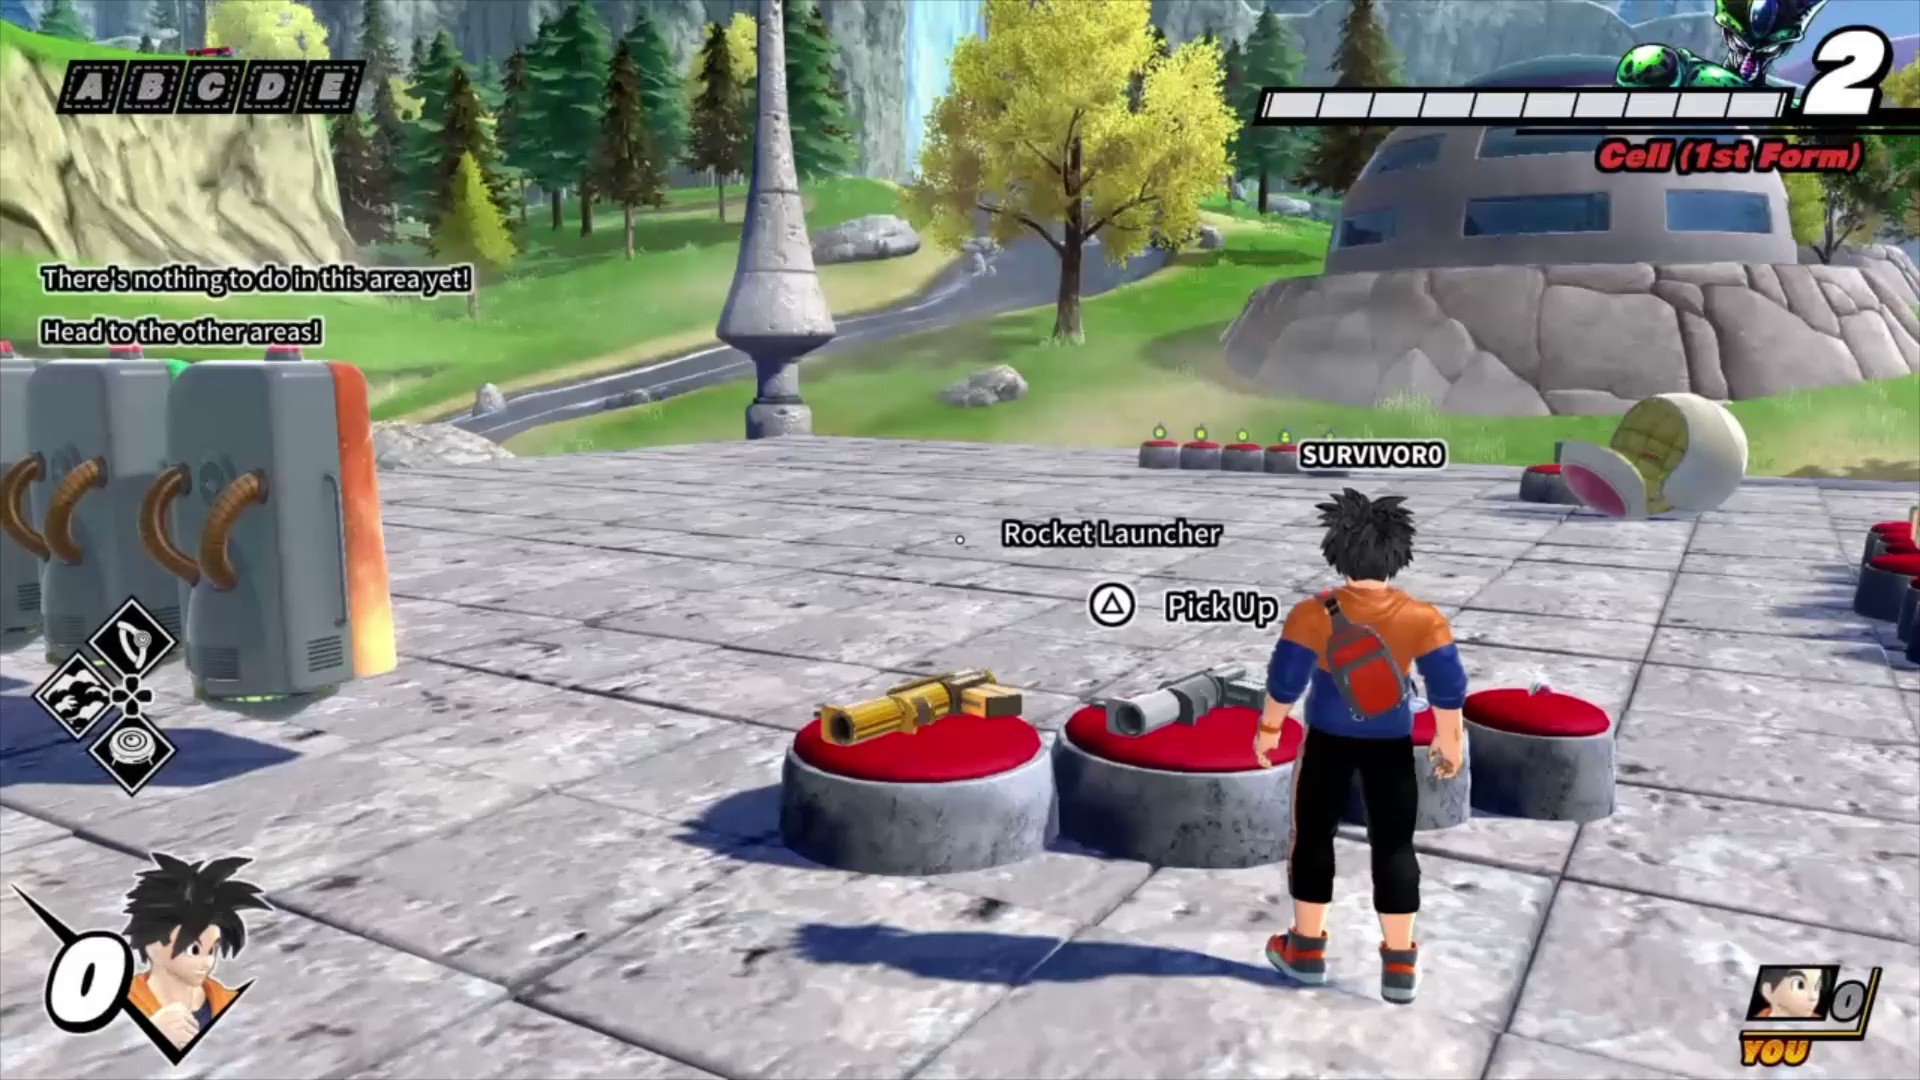 Dragon Ball: The Breakers - Gameplay Tips You Might Not Know